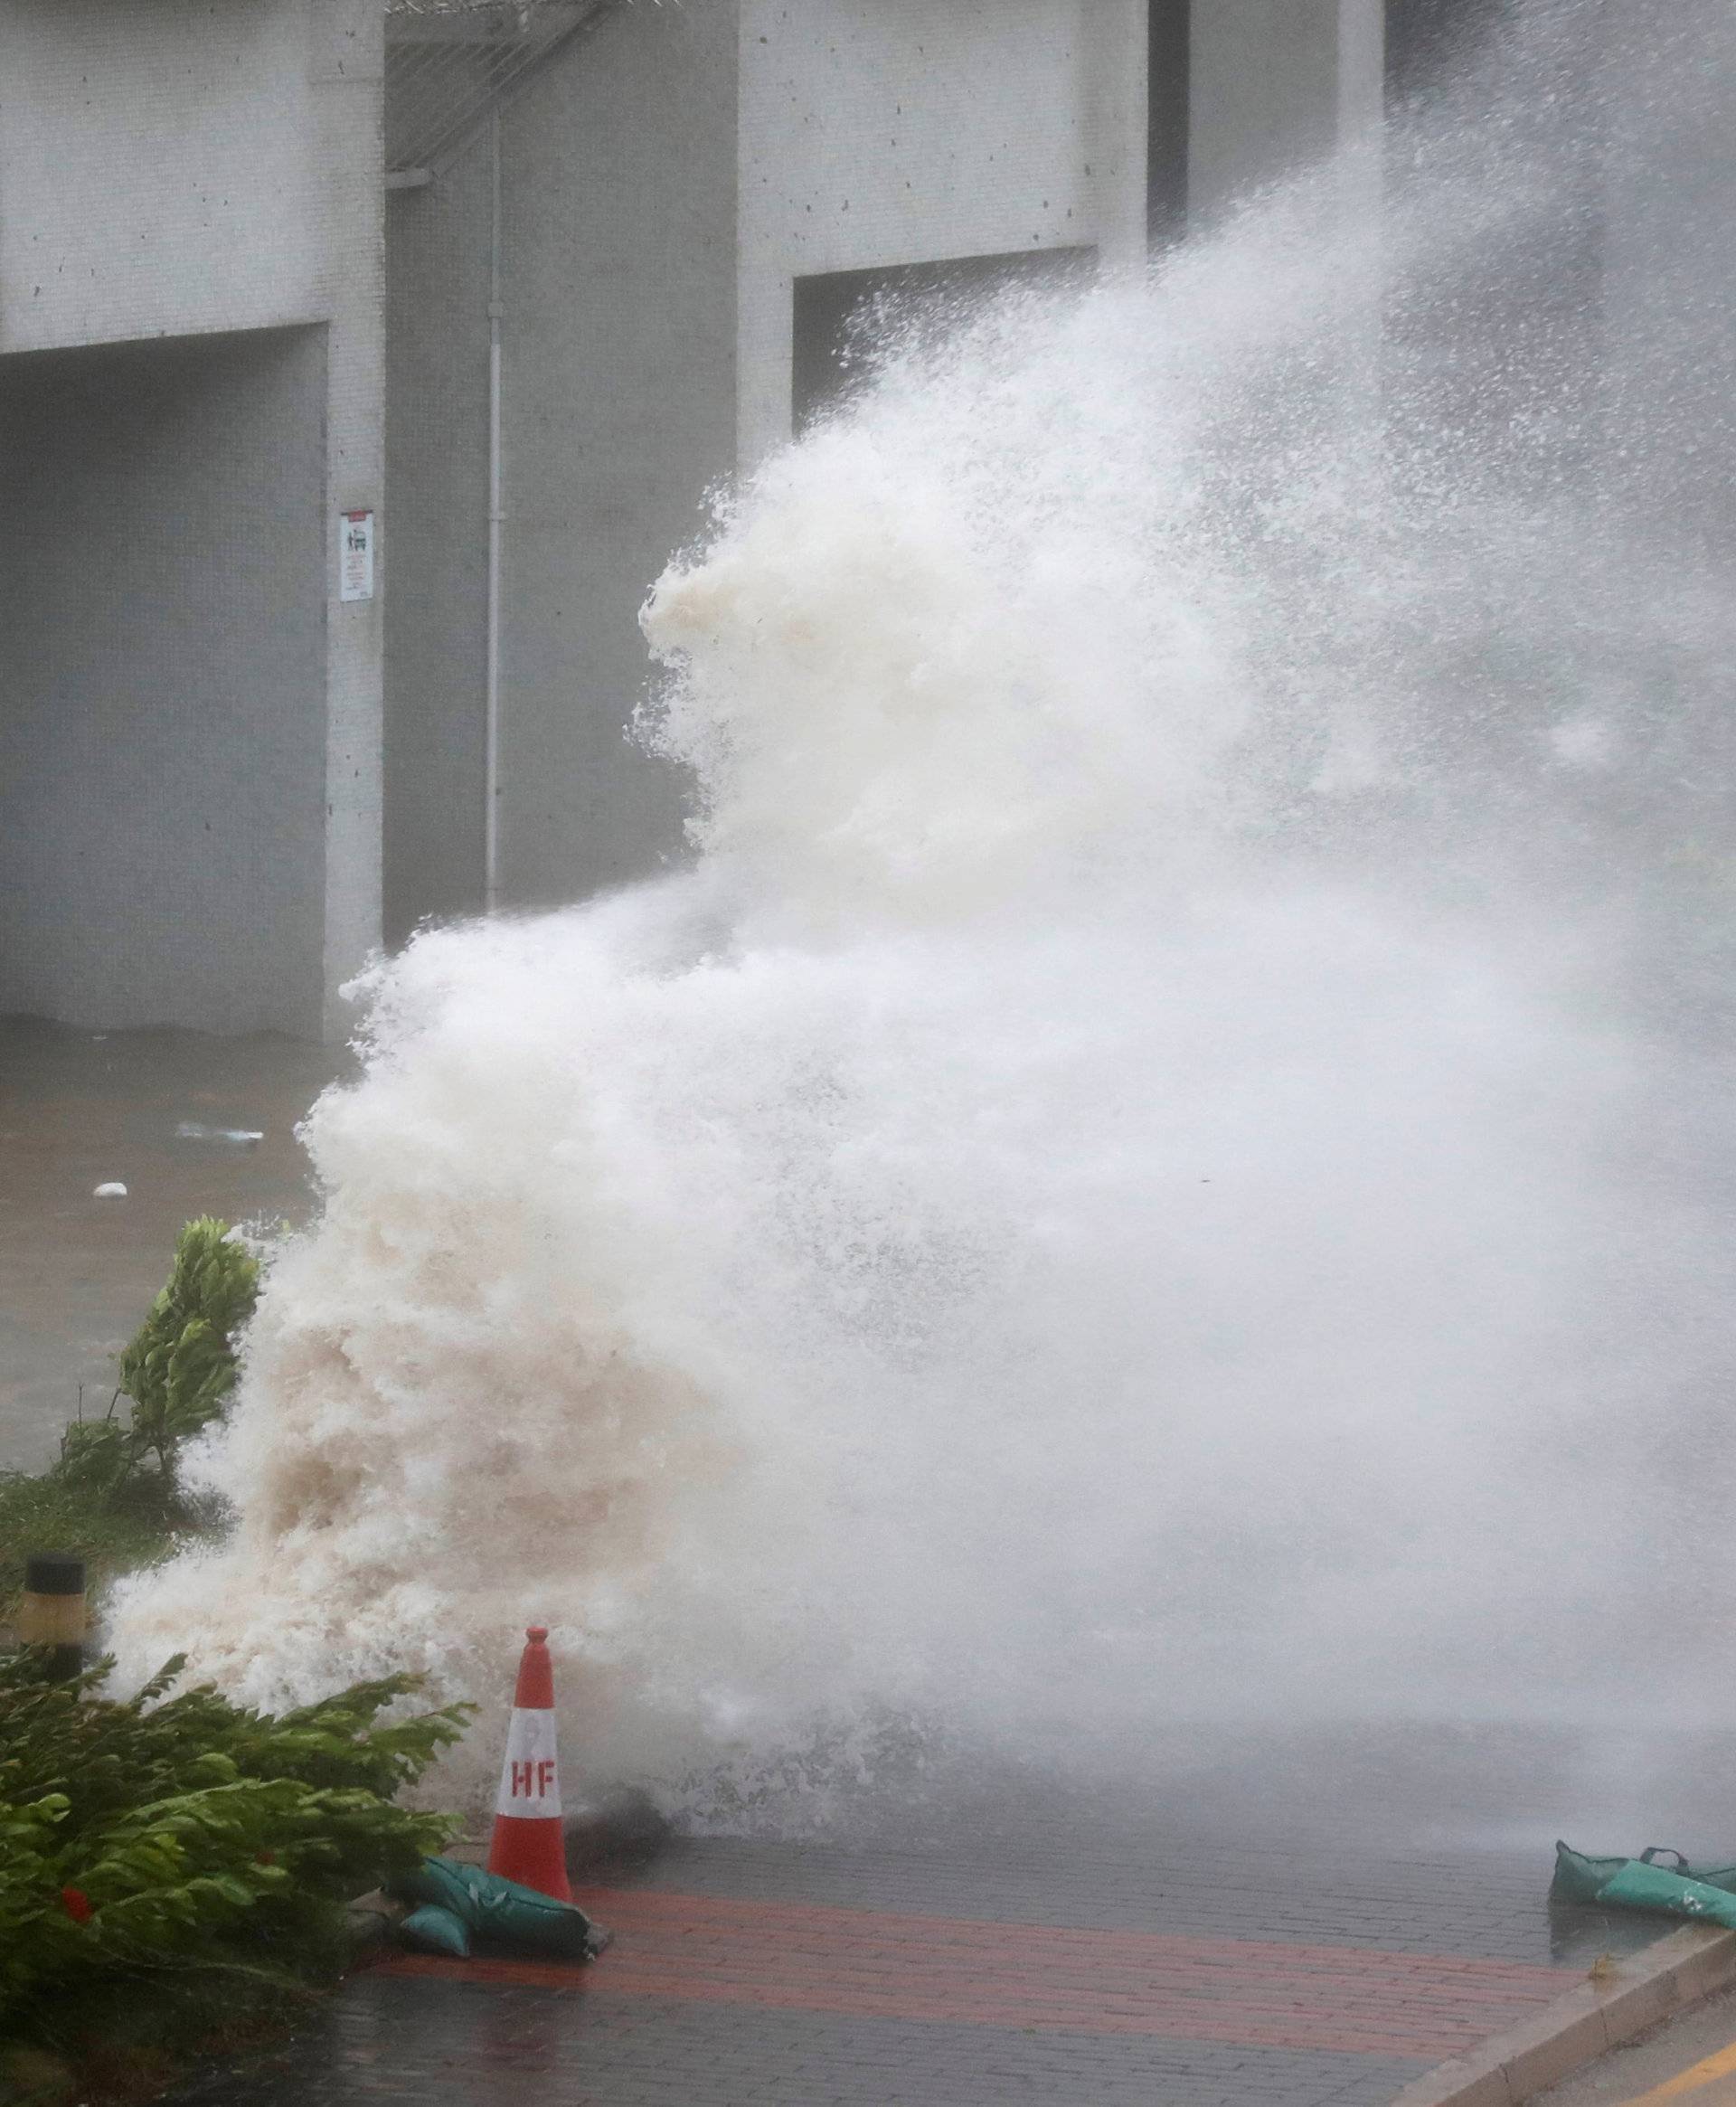 Waves triggered by Typhoon Hato are seen in Hong Kong